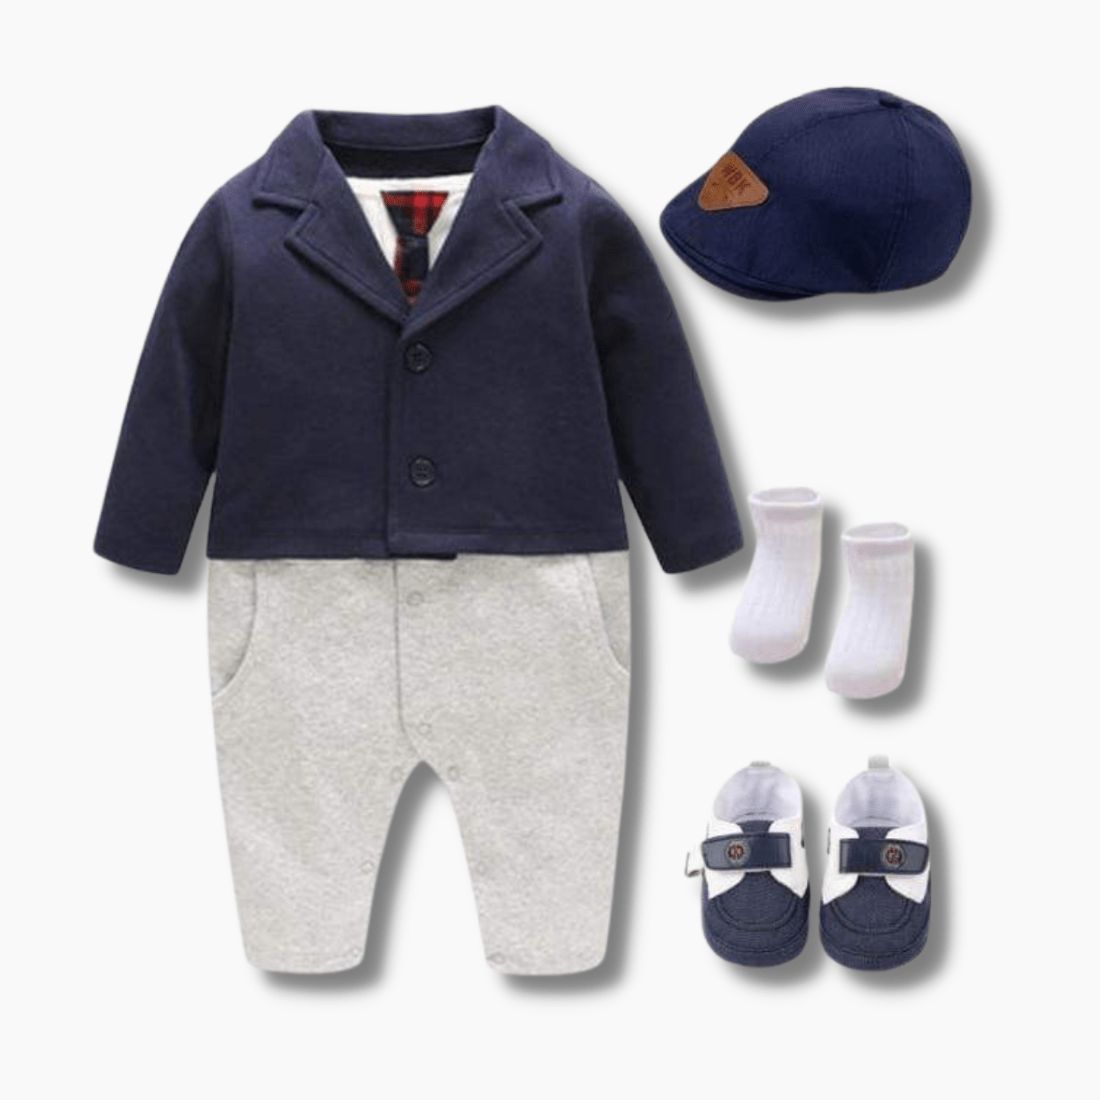 Boy's Clothing Navy Smart Romper Outfit